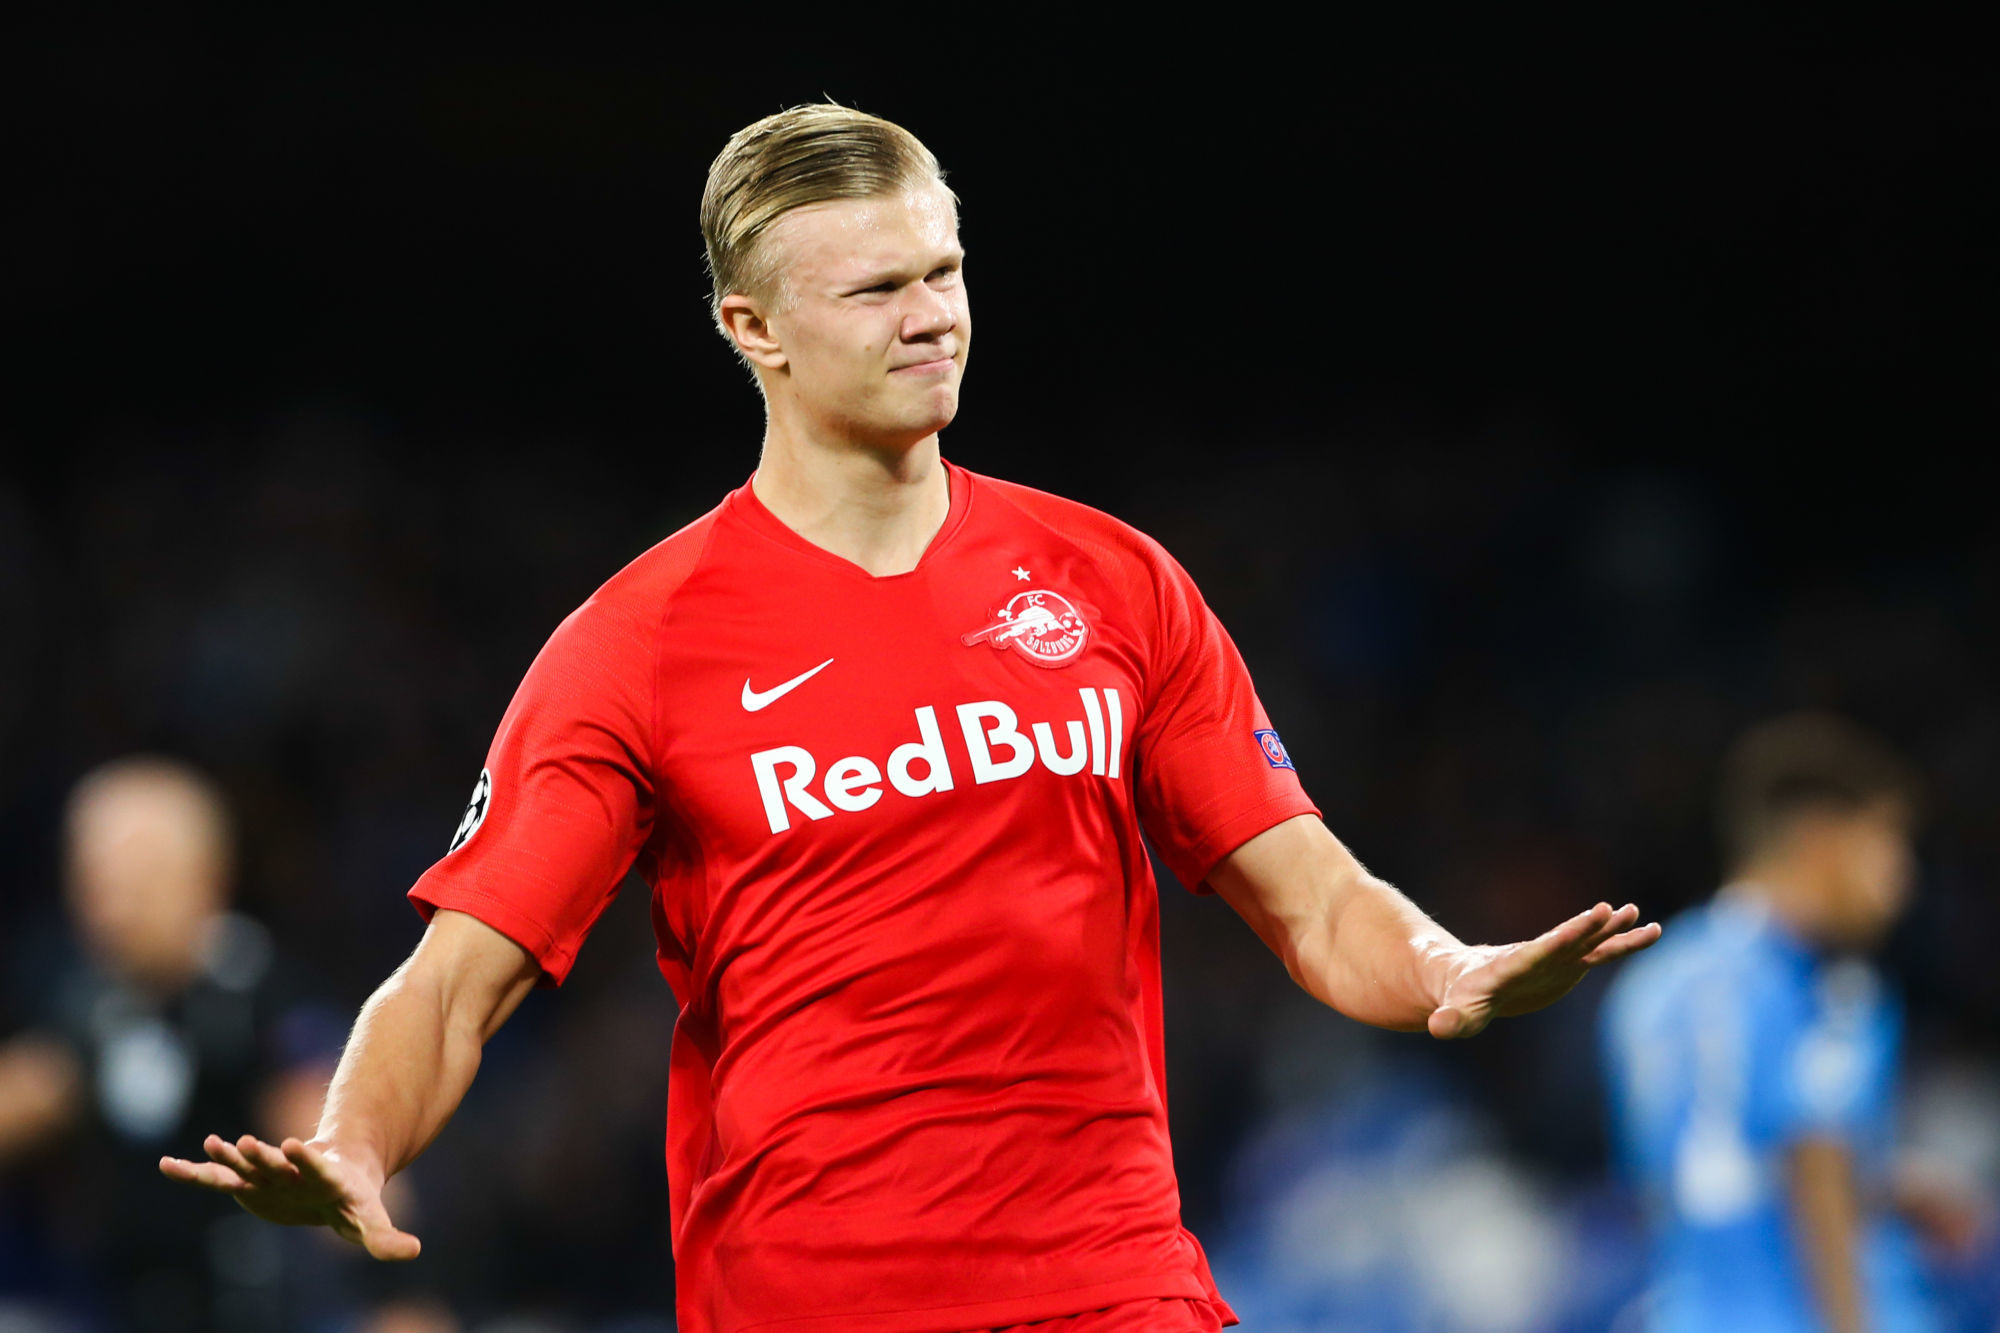 NAPLES,ITALY,05.NOV.19 - SOCCER - UEFA Champions League, group stage, SSC Napoli vs Red Bull Salzburg. Image shows Erling Braut Haaland (RBS). Photo: GEPA pictures/ Mathias Mandl 

Photo by Icon Sport - Erling HAALAND - Stade San Paolo - Naples (Italie)